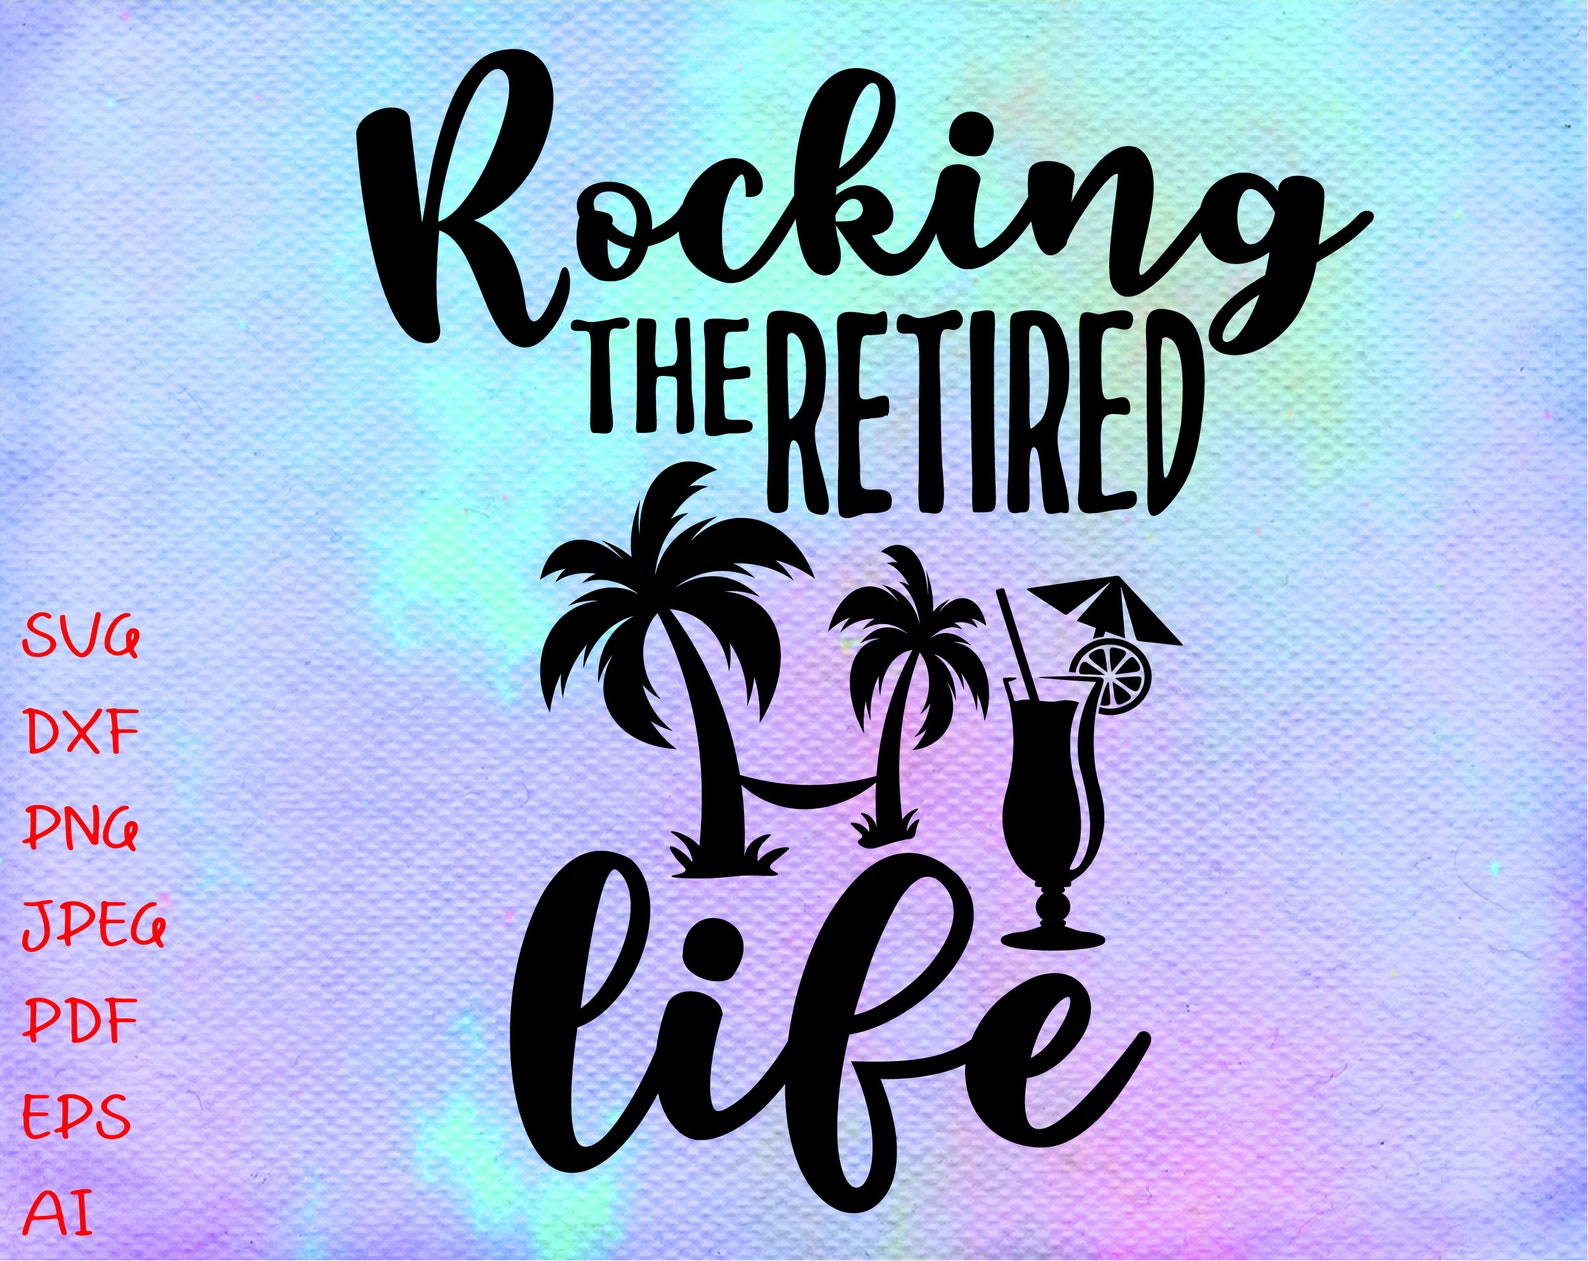 Rocking The Retired Life SVG File Instant Download Retirement | Etsy